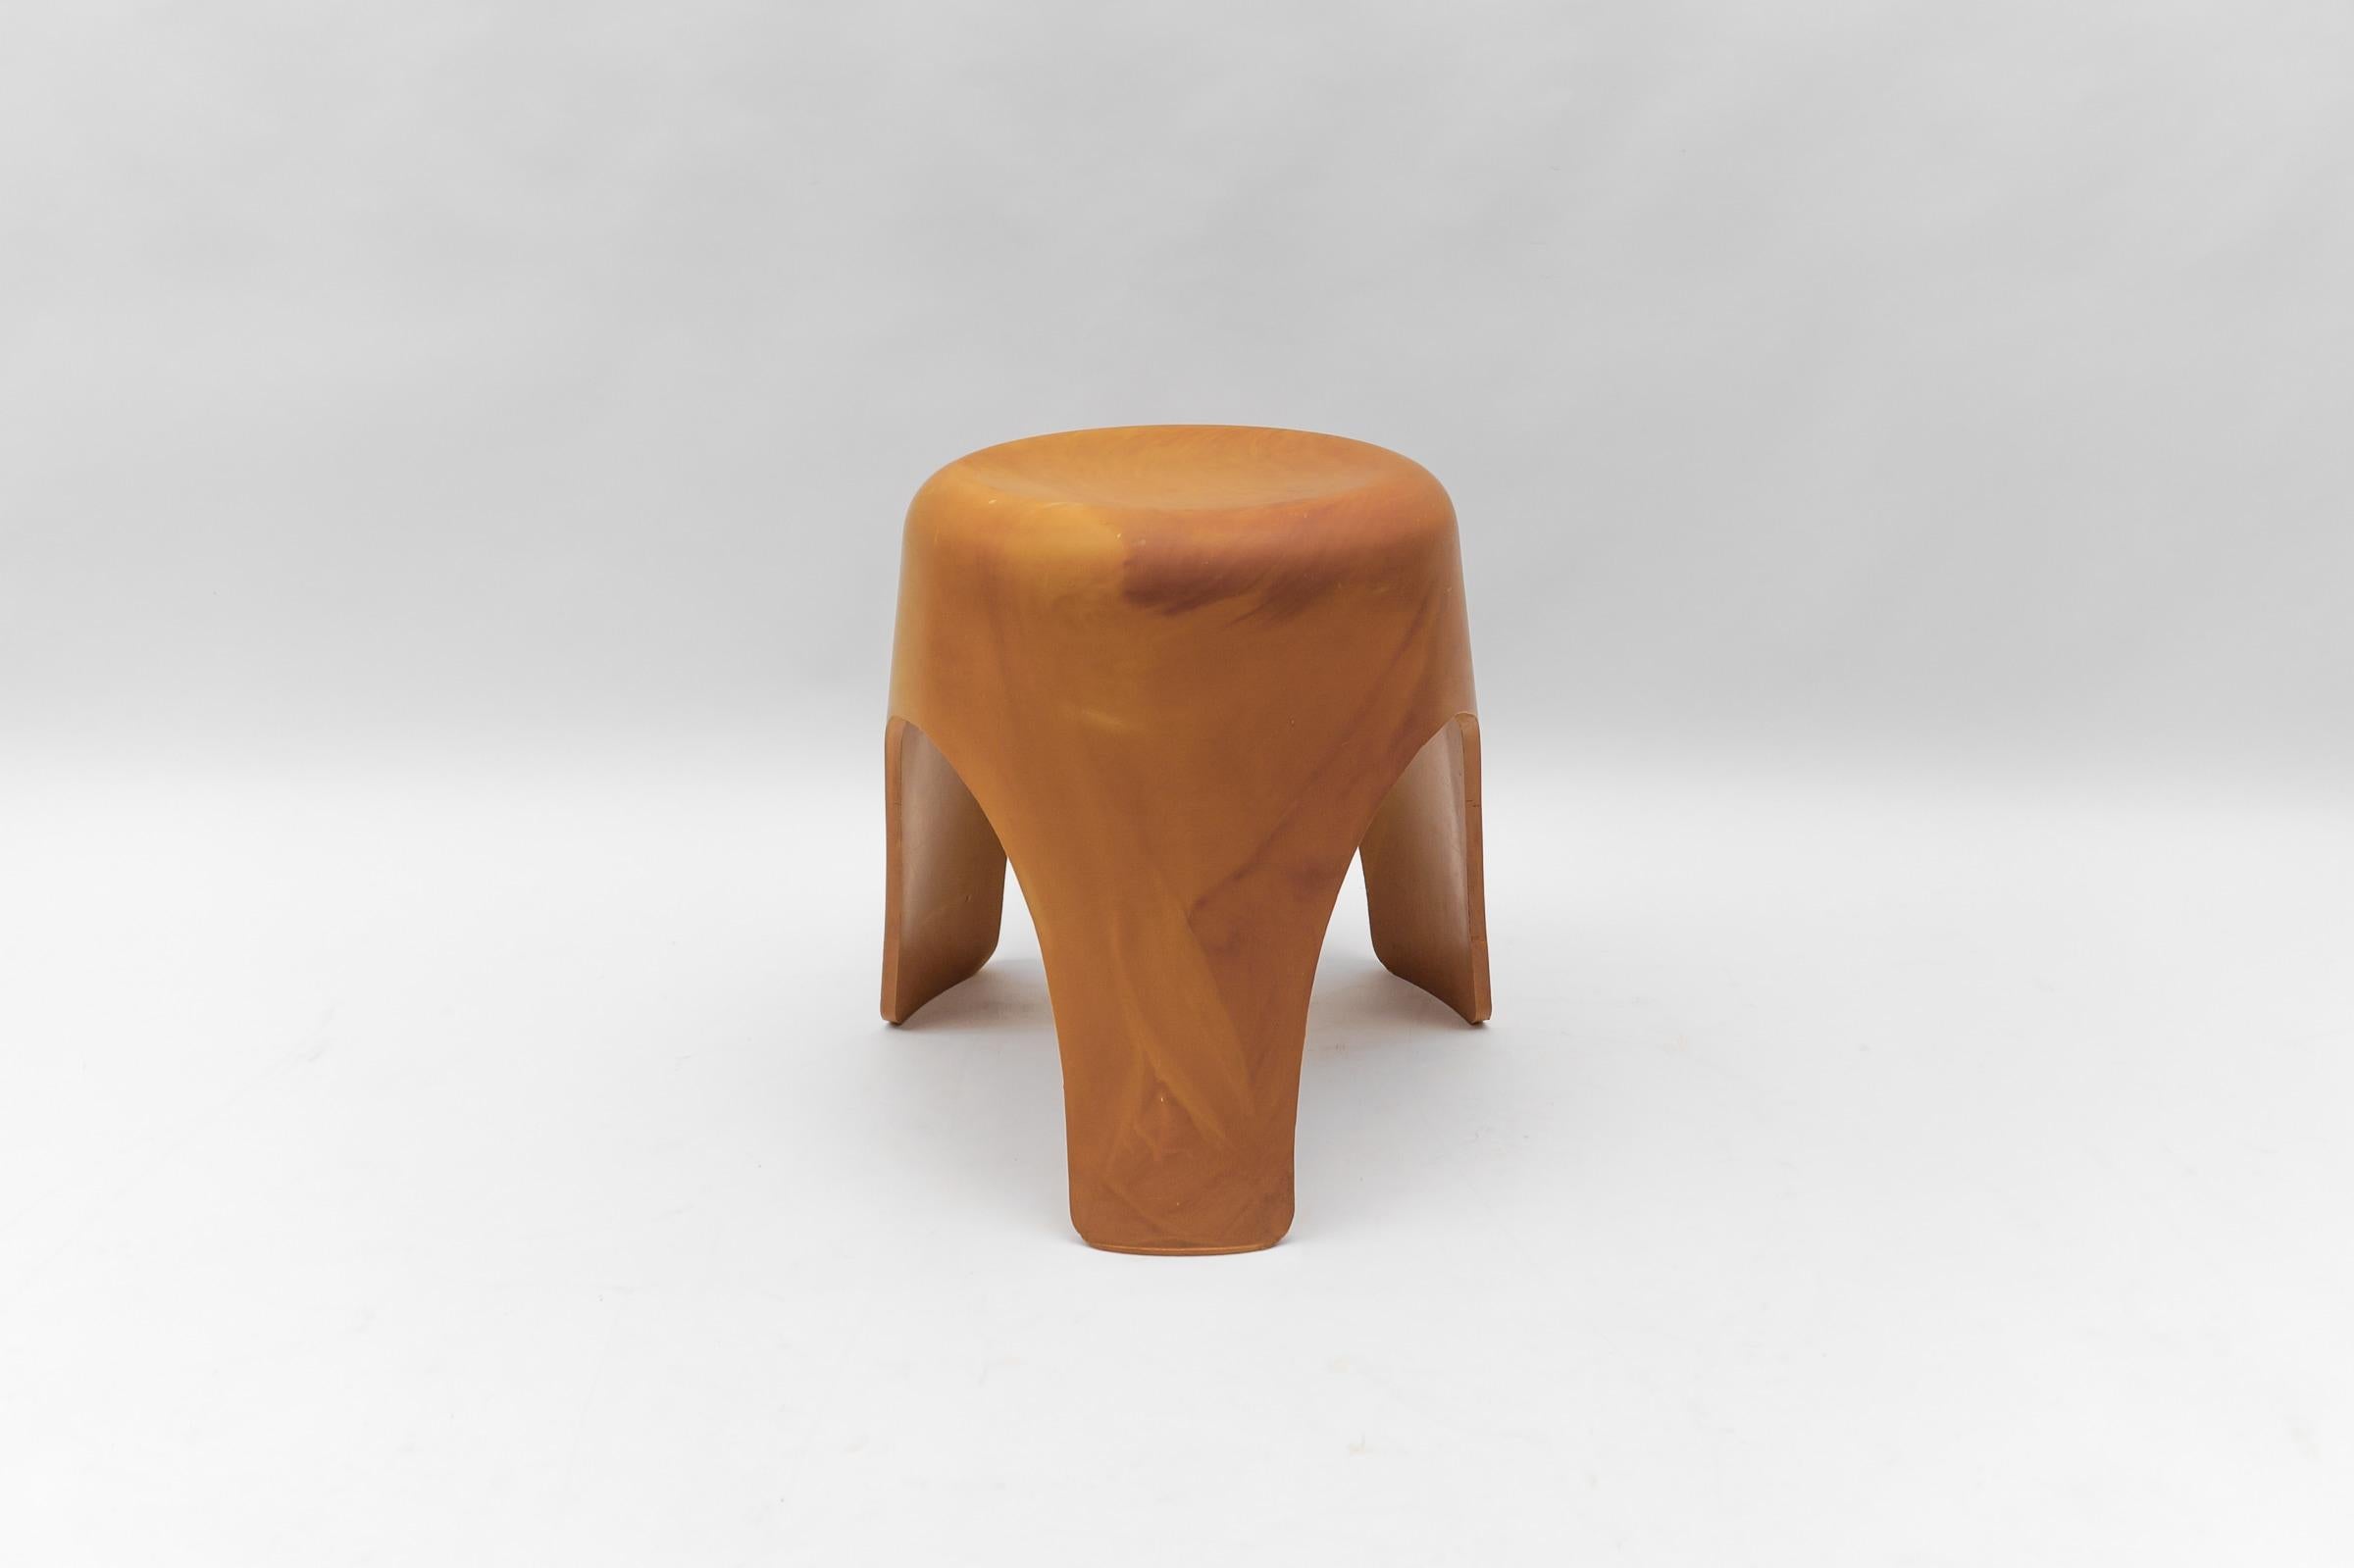 1. of 2 Elephant Stool attributed to Sori Yanagi, 1950s

Probably Prototype.

We have a total of 2 of these stools. They are made of a plastic mixture and appear to be prototypes or molds.

The second stool is also offered here on the platform.